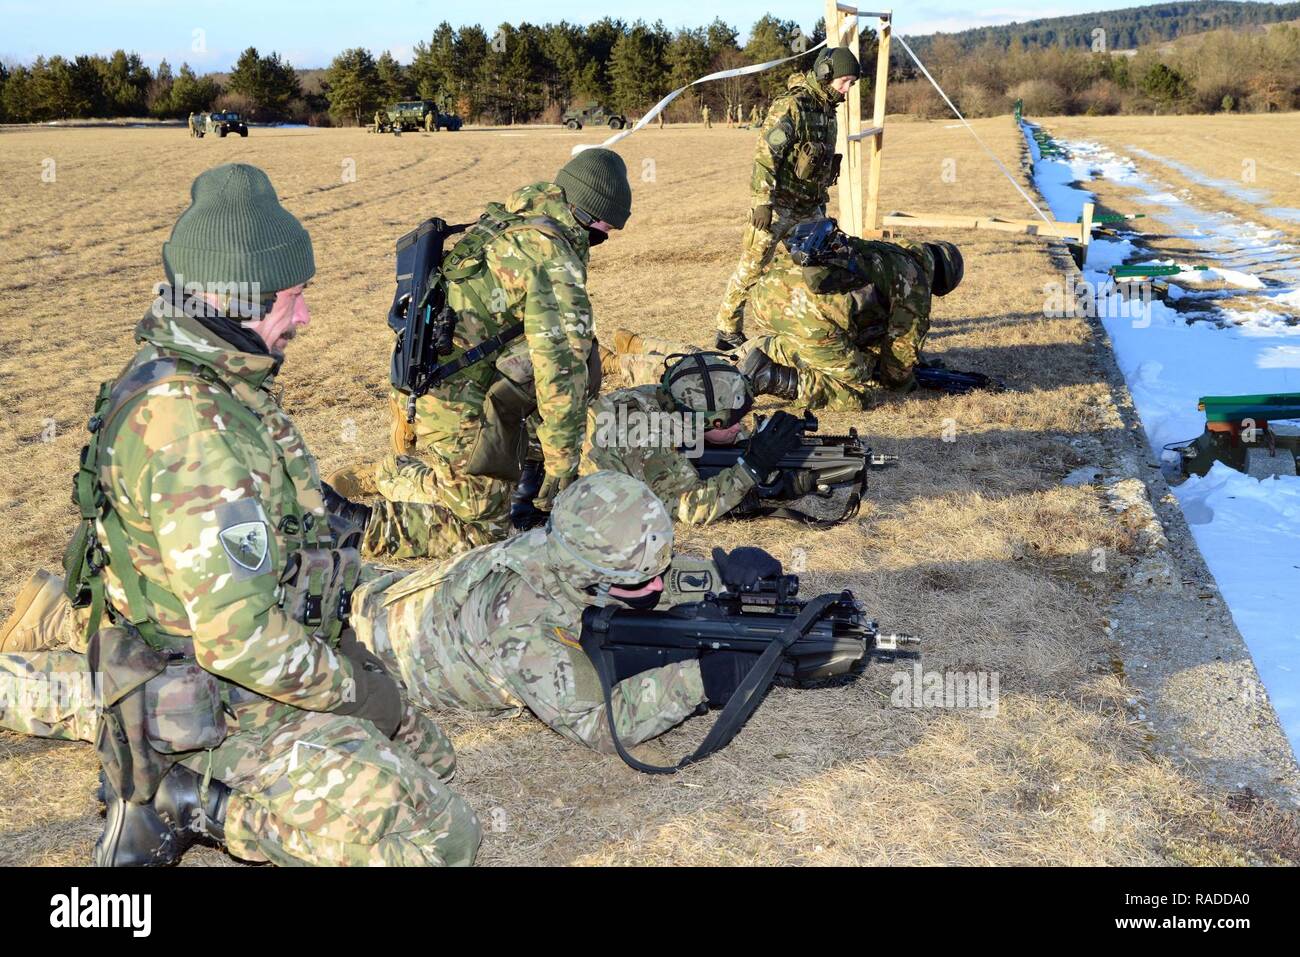 U.S. Army paratroopers from the 173rd Brigade Support Battalion, 173rd Airborne Brigade and Slovenian soldiers cross-train on the M4 carbine rifles and FN2000 assault rifles during exercise Lipizzaner III in Bac, Slovenia, on Jan. 26, 2017. Lipizzaner is a combined squad-level training exercise in preparation for platoon evaluation, and to validate battalion-level deployment procedures. Stock Photo